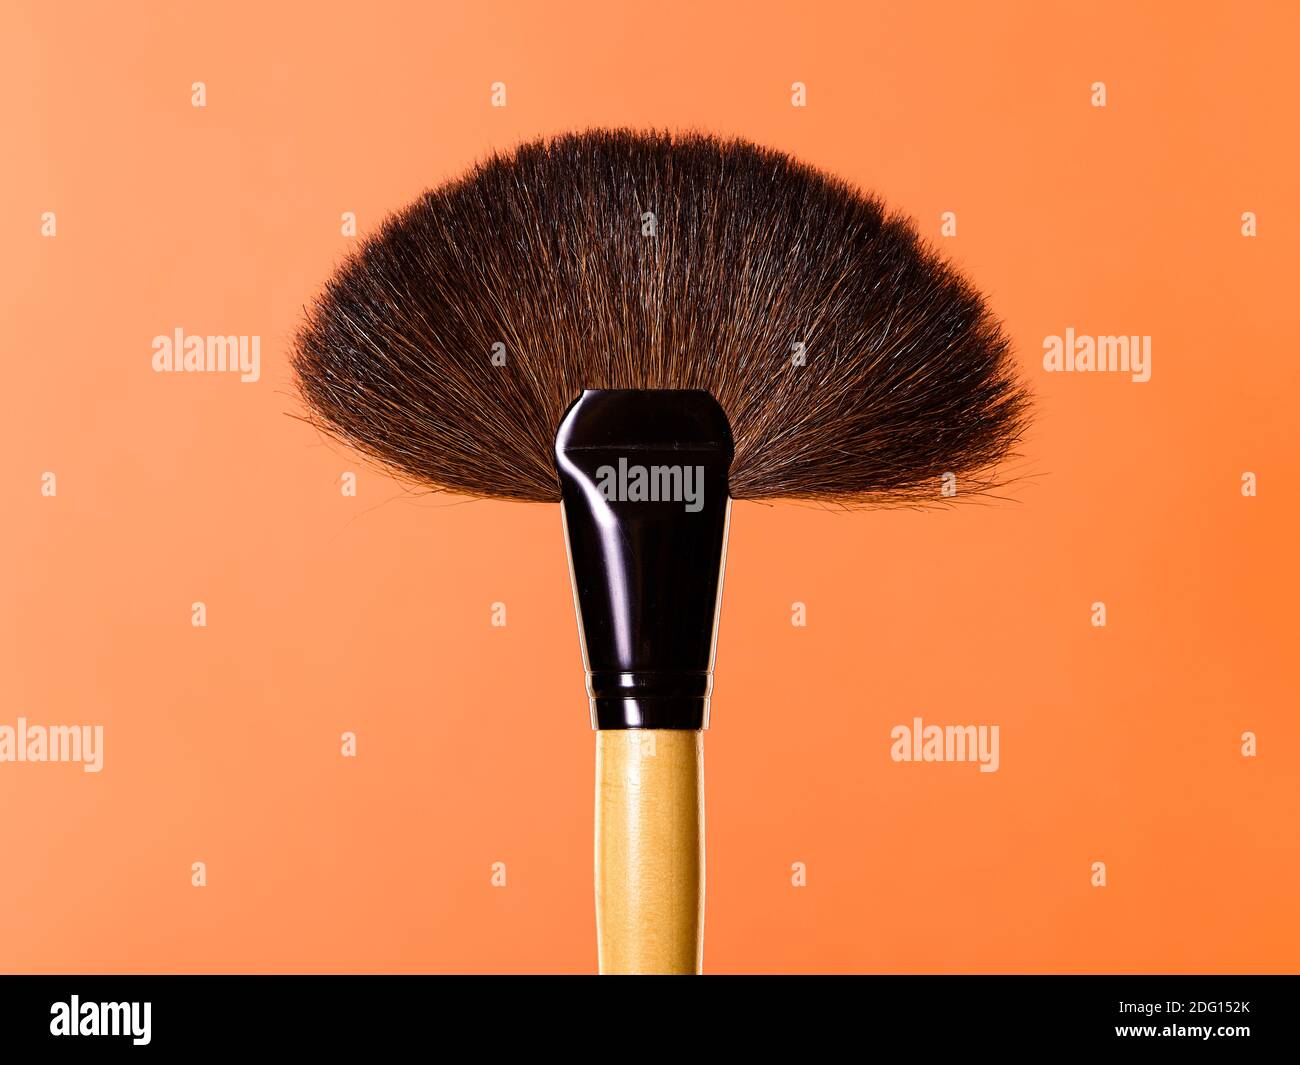 Makeup brushes, everyday make-up tools. Cosmetic essentials on bright blue background, closeup Stock Photo